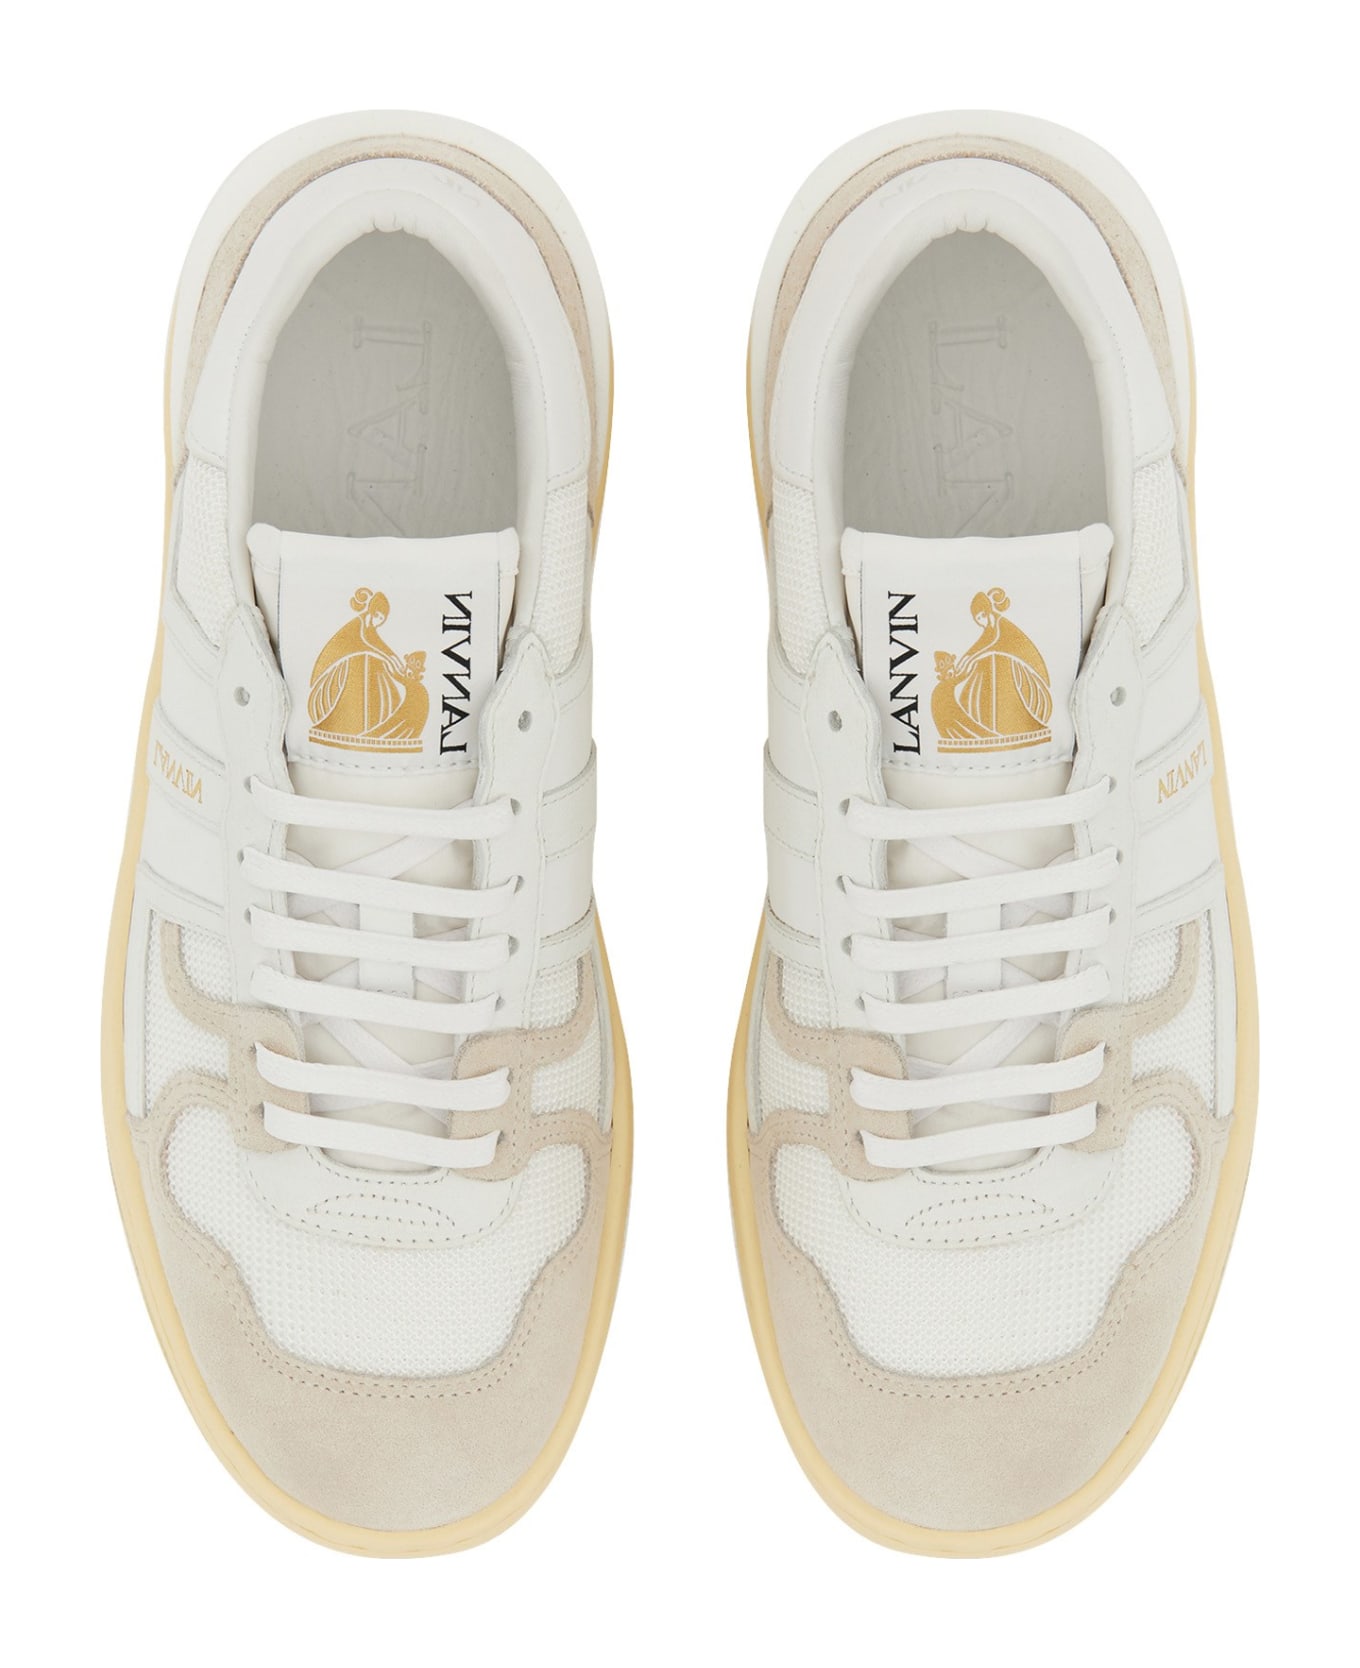 Lanvin Mesh, Suede And Nappa Leather Sneaker - White